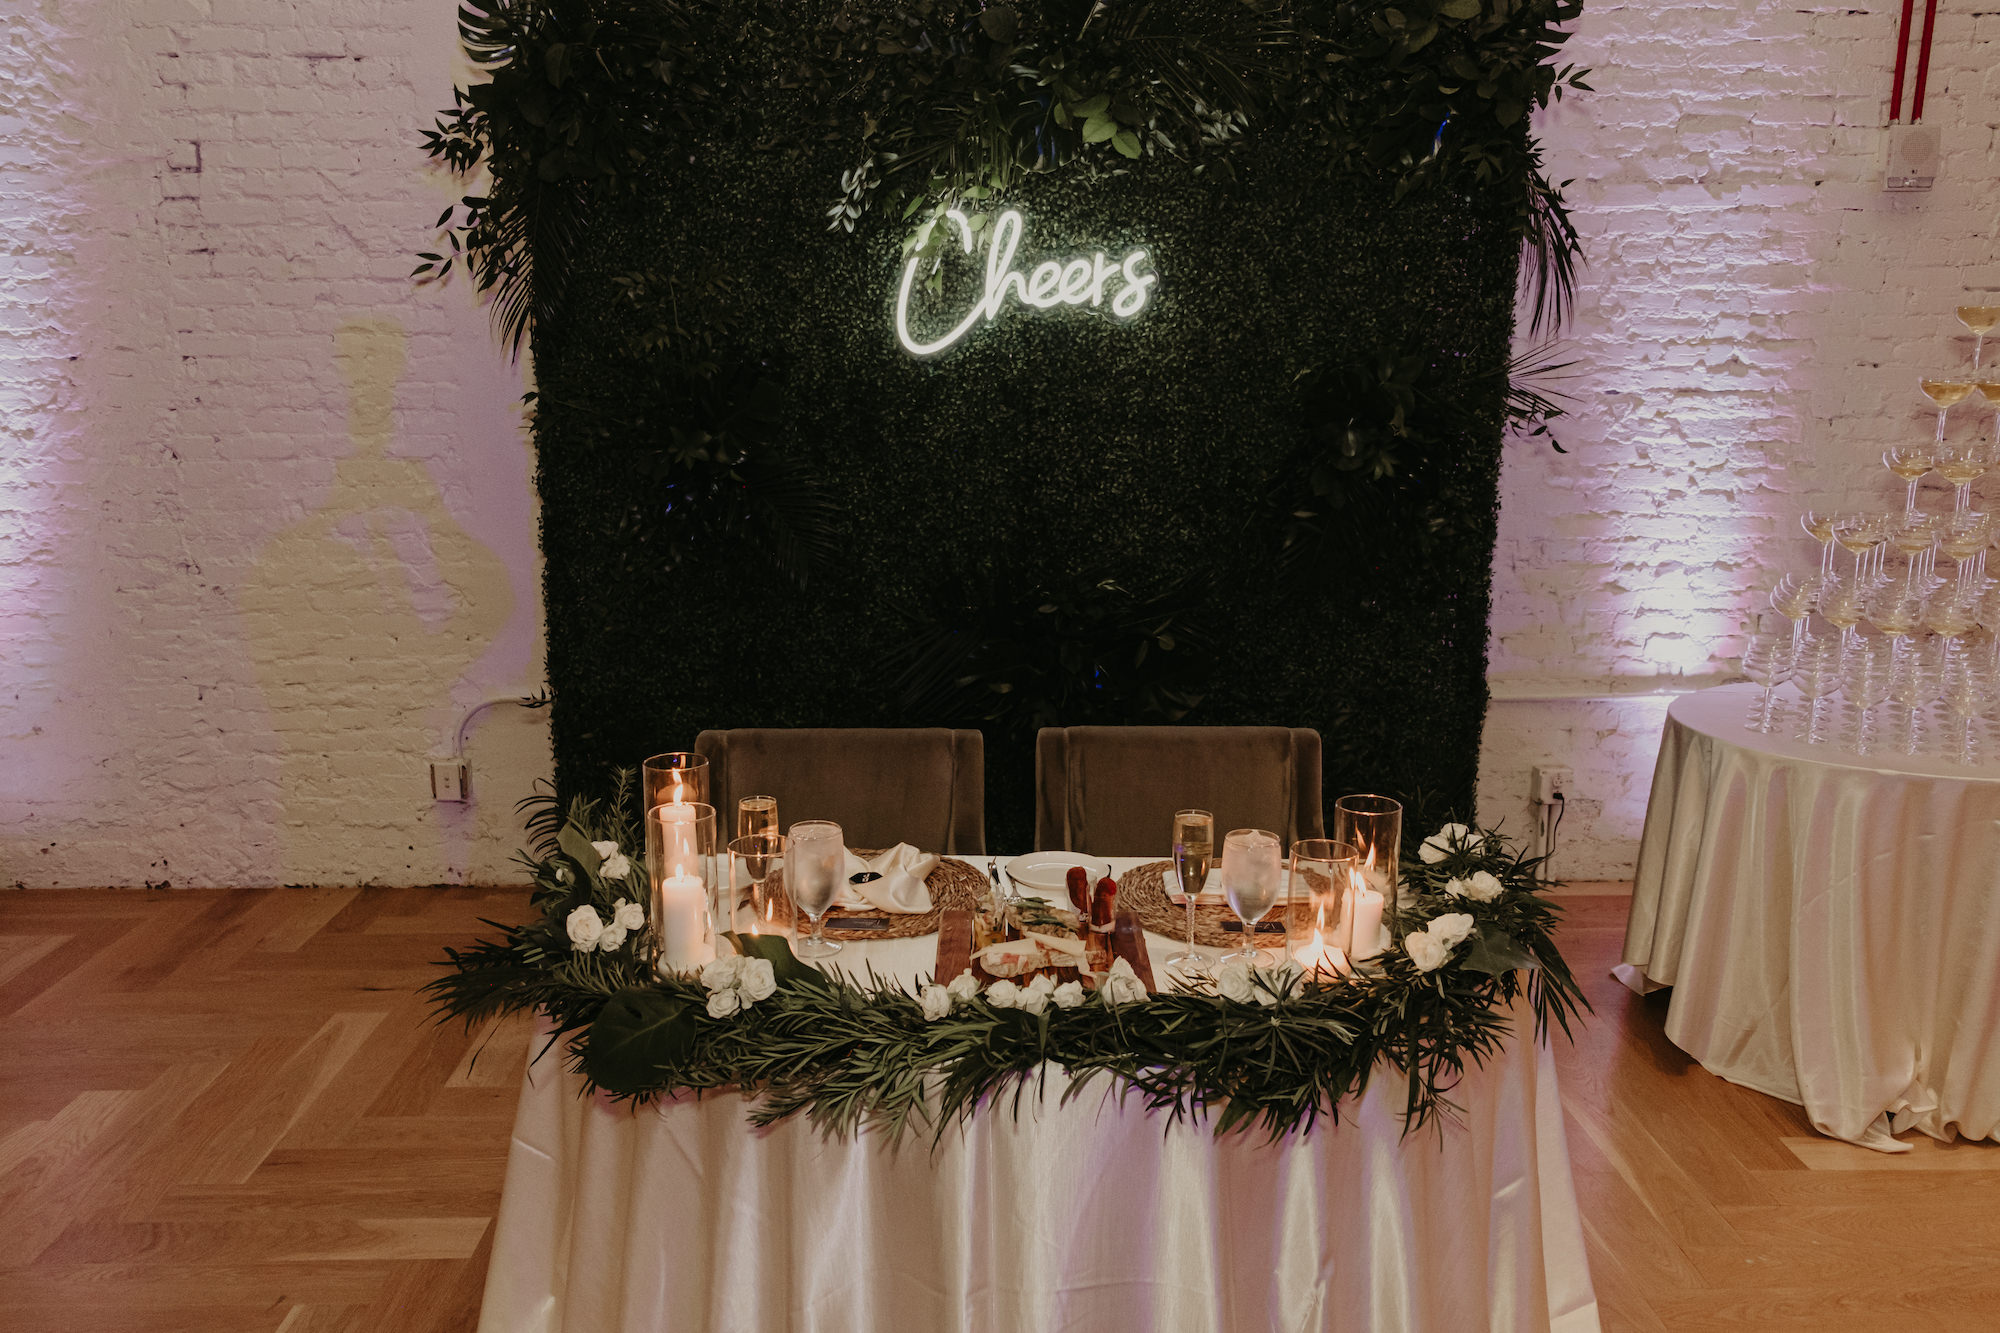 Tropical Greenery Wall Backdrop | Sweetheart Candlelit Head Wedding Reception Table Inspiration with Neon Cheers Sign